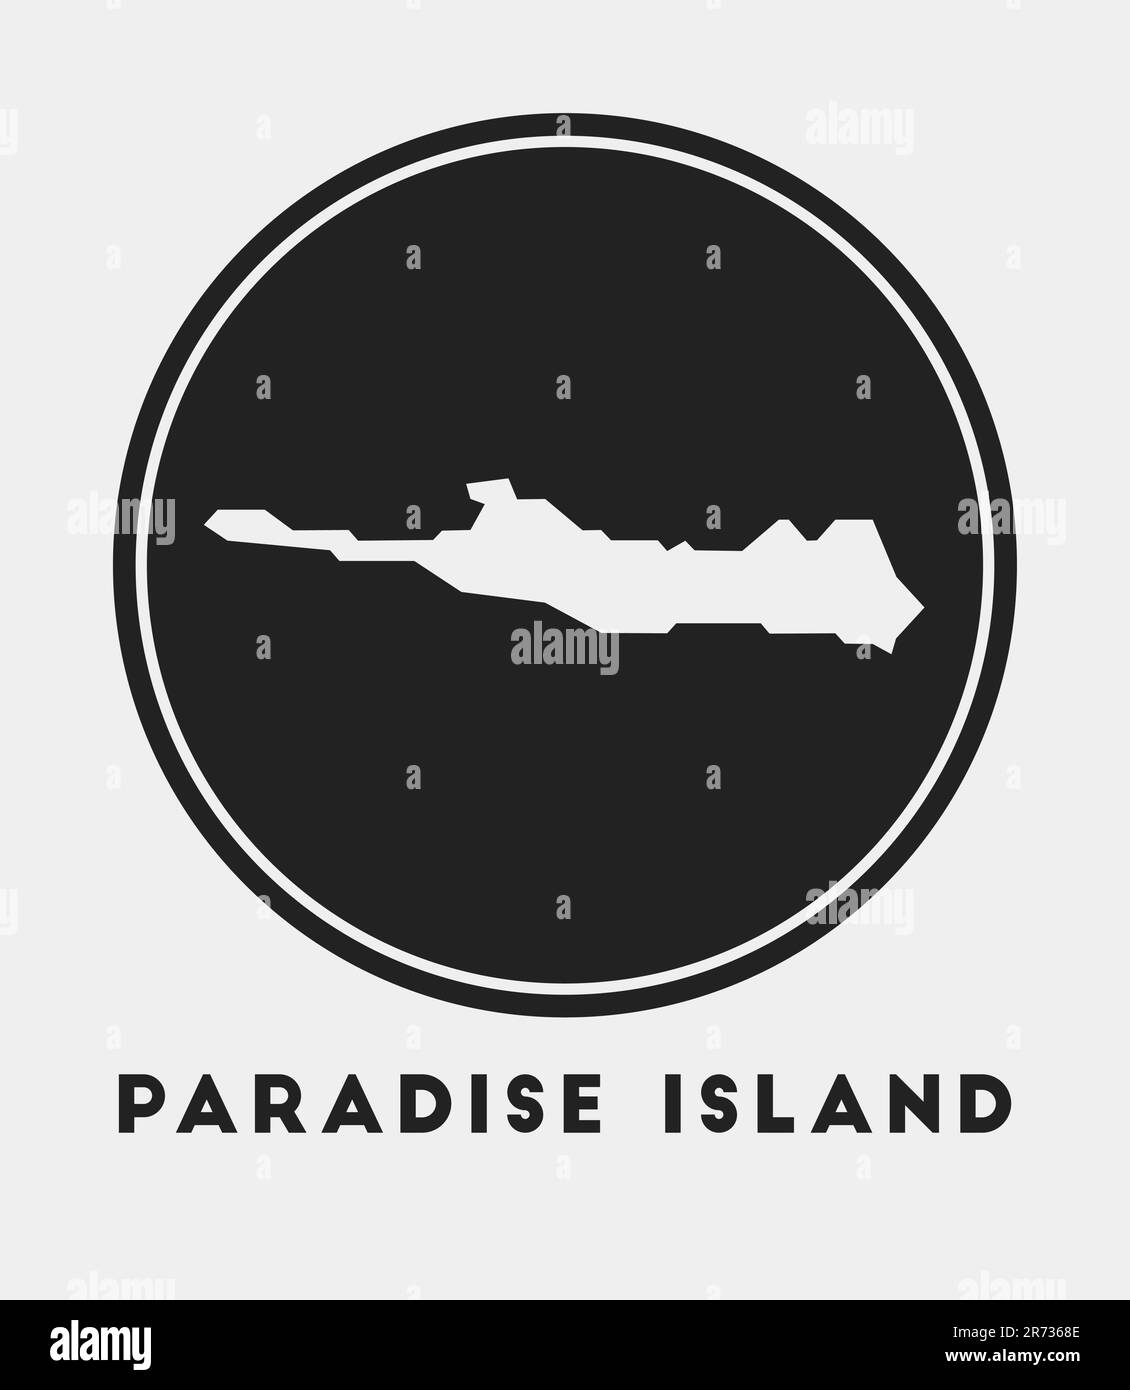 Paradise Island icon. Round logo with map and title. Stylish Paradise Island badge with map. Vector illustration. Stock Vector